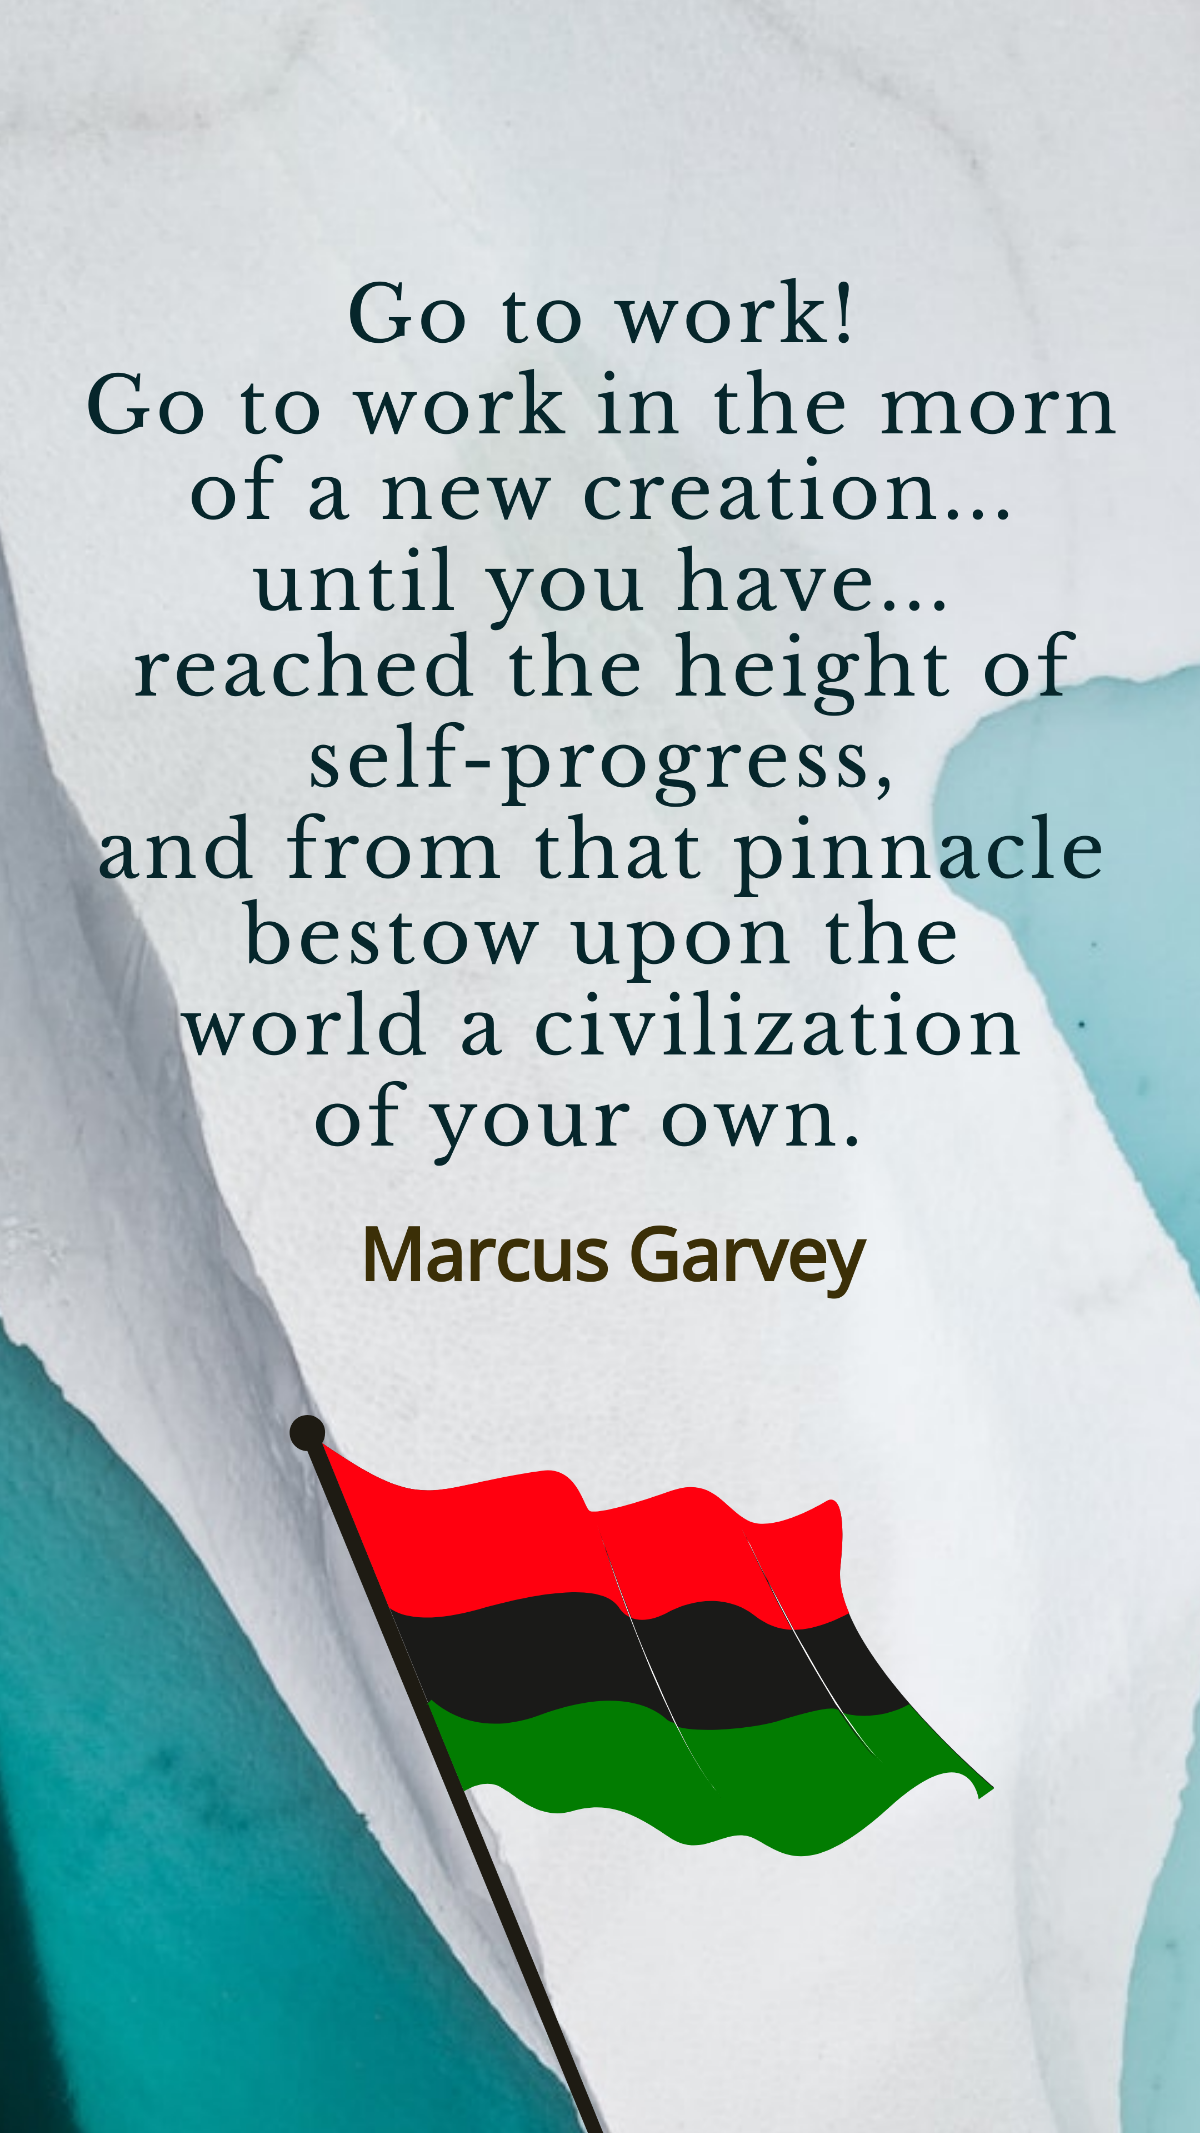 Marcus Garvey - Go to work! Go to work in the morn of a new creation... until you have... reached the height of self-progress, and from that pinnacle bestow upon the world a civilization of your own.